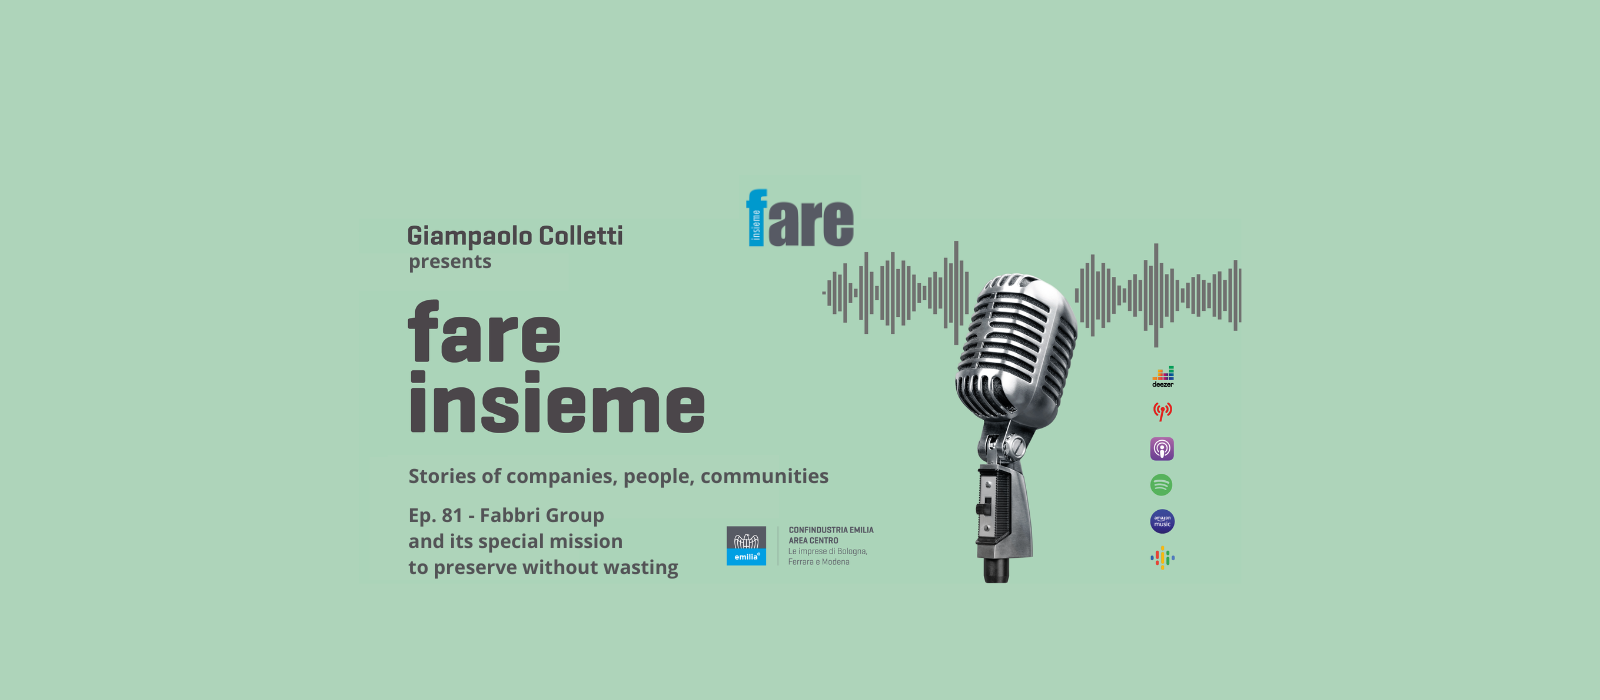 FABBRI GROUP FEATURED IN THE “CONFINDUSTRIA” PODCAST